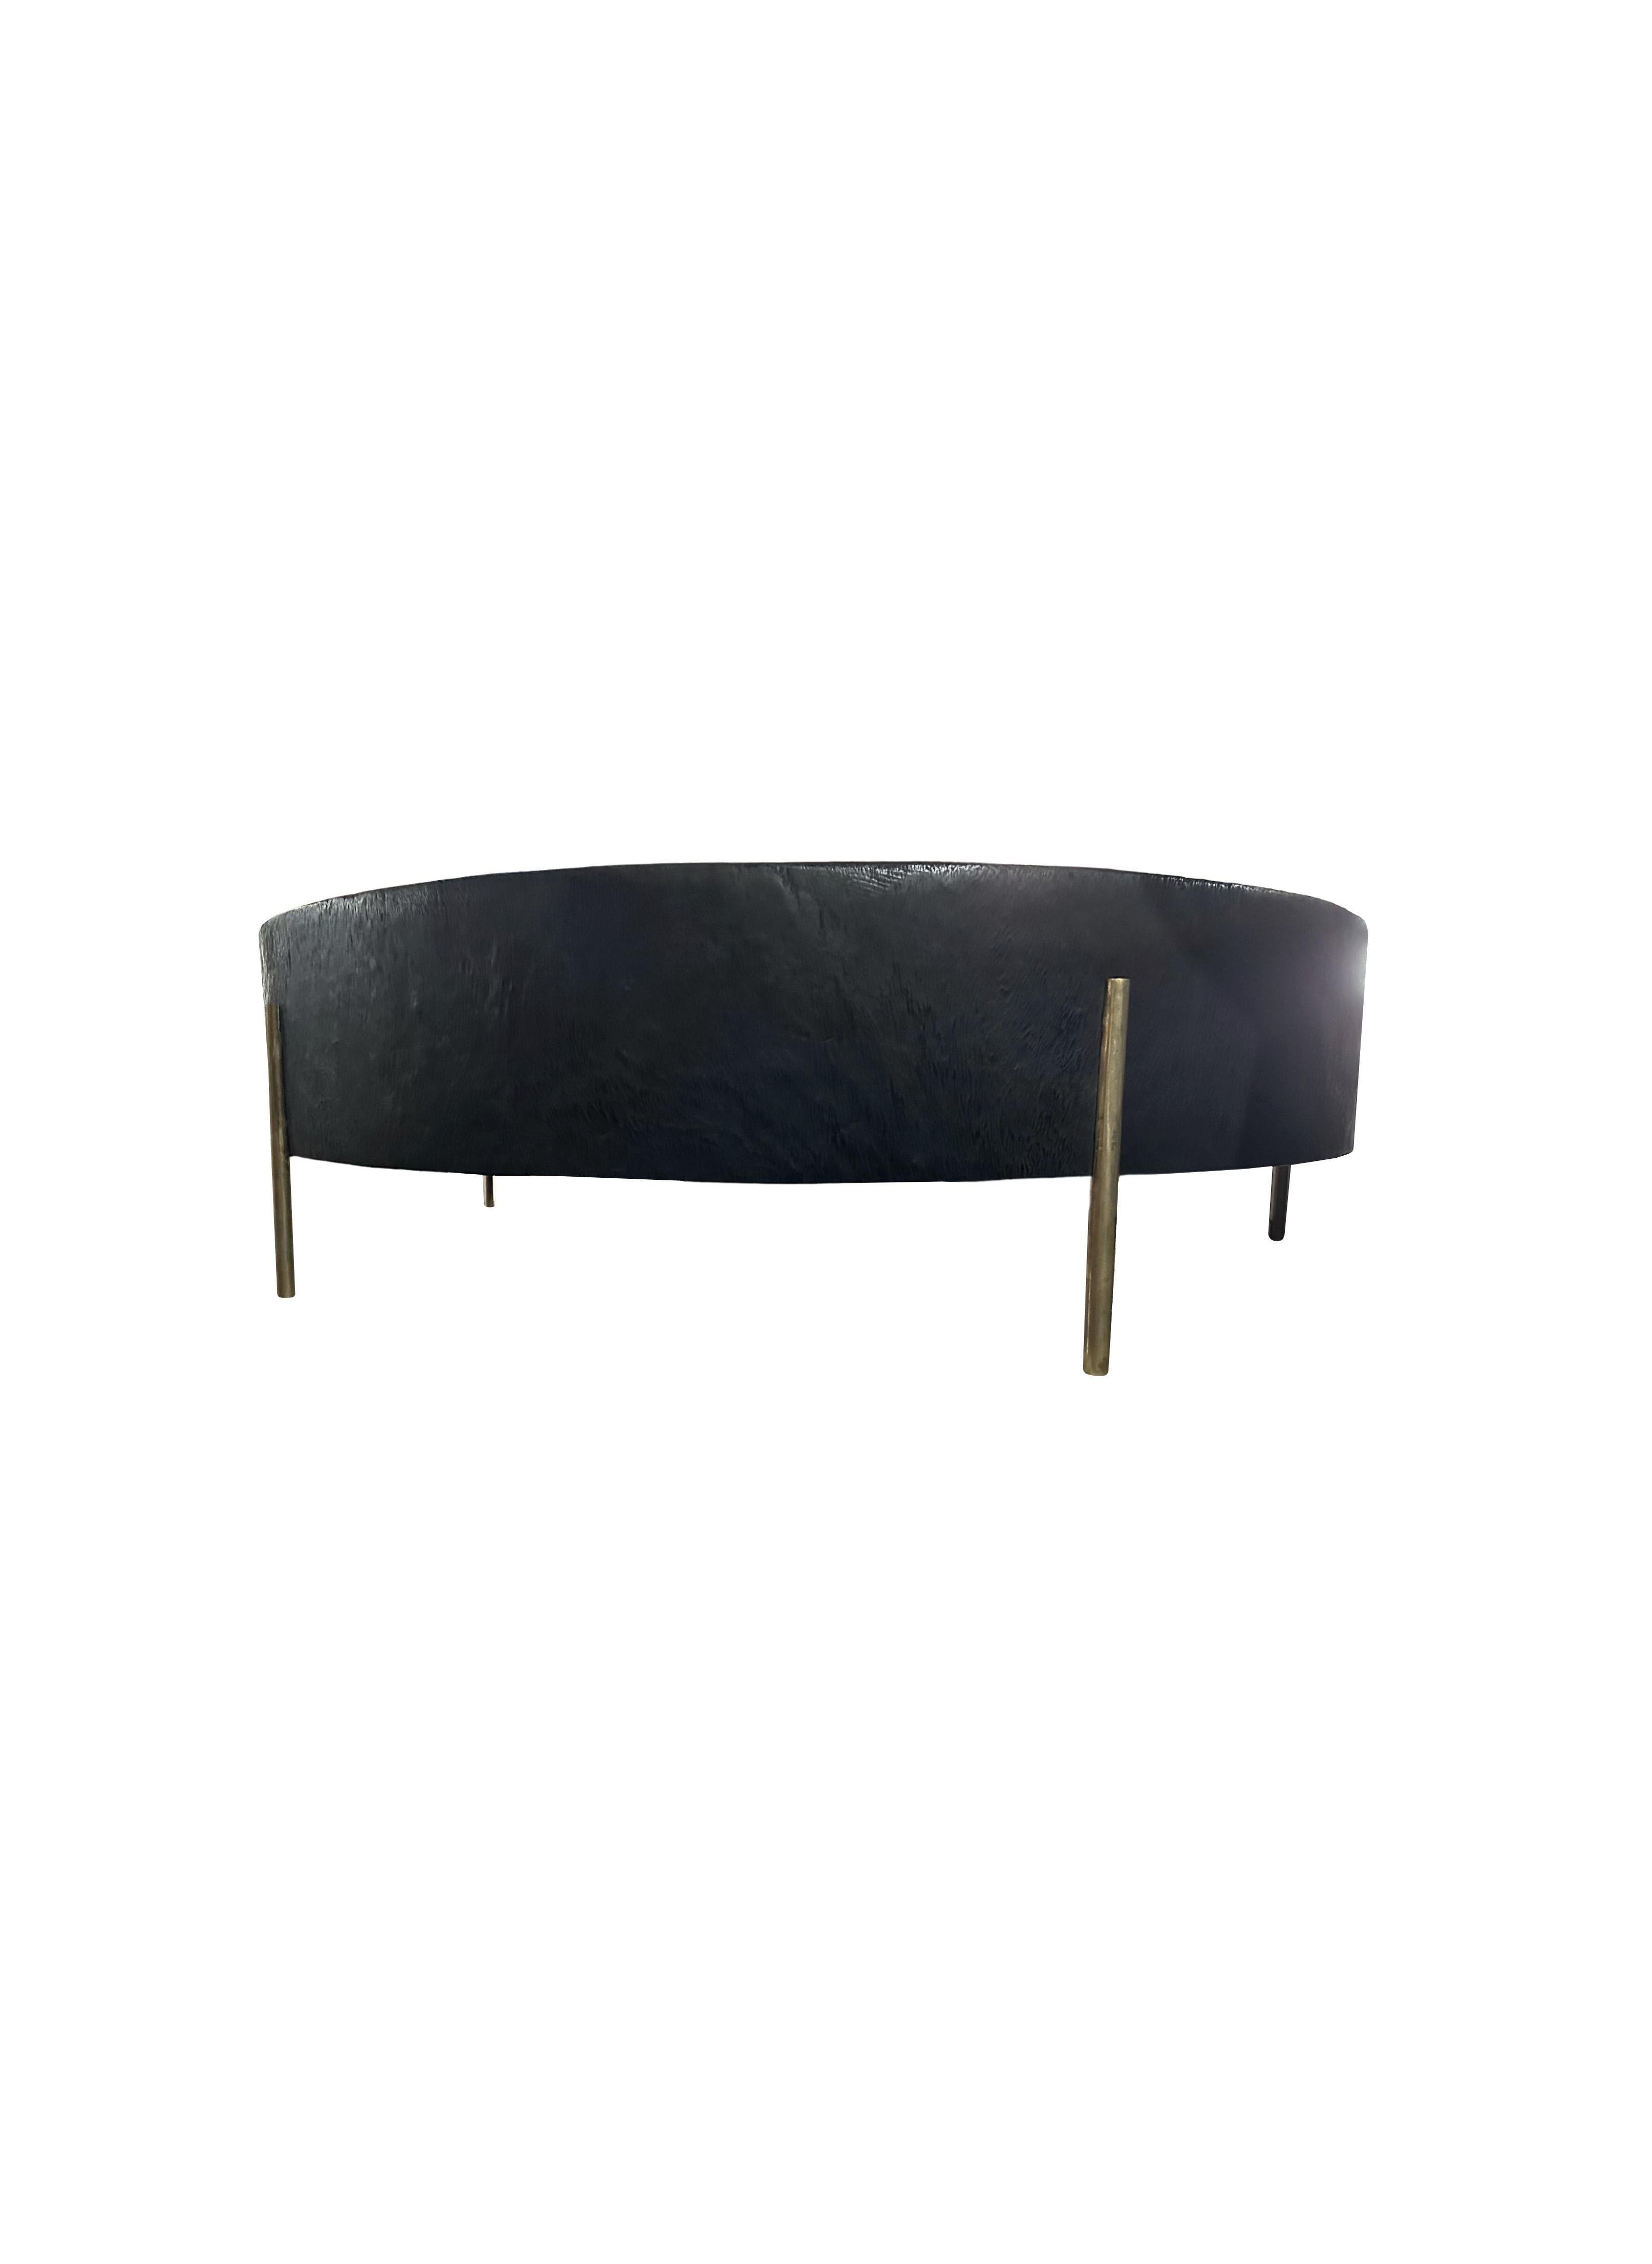 Organic Modern Modern Organic Side Table Crafted from Mango Wood with Brass Legs, Burnt Finish For Sale